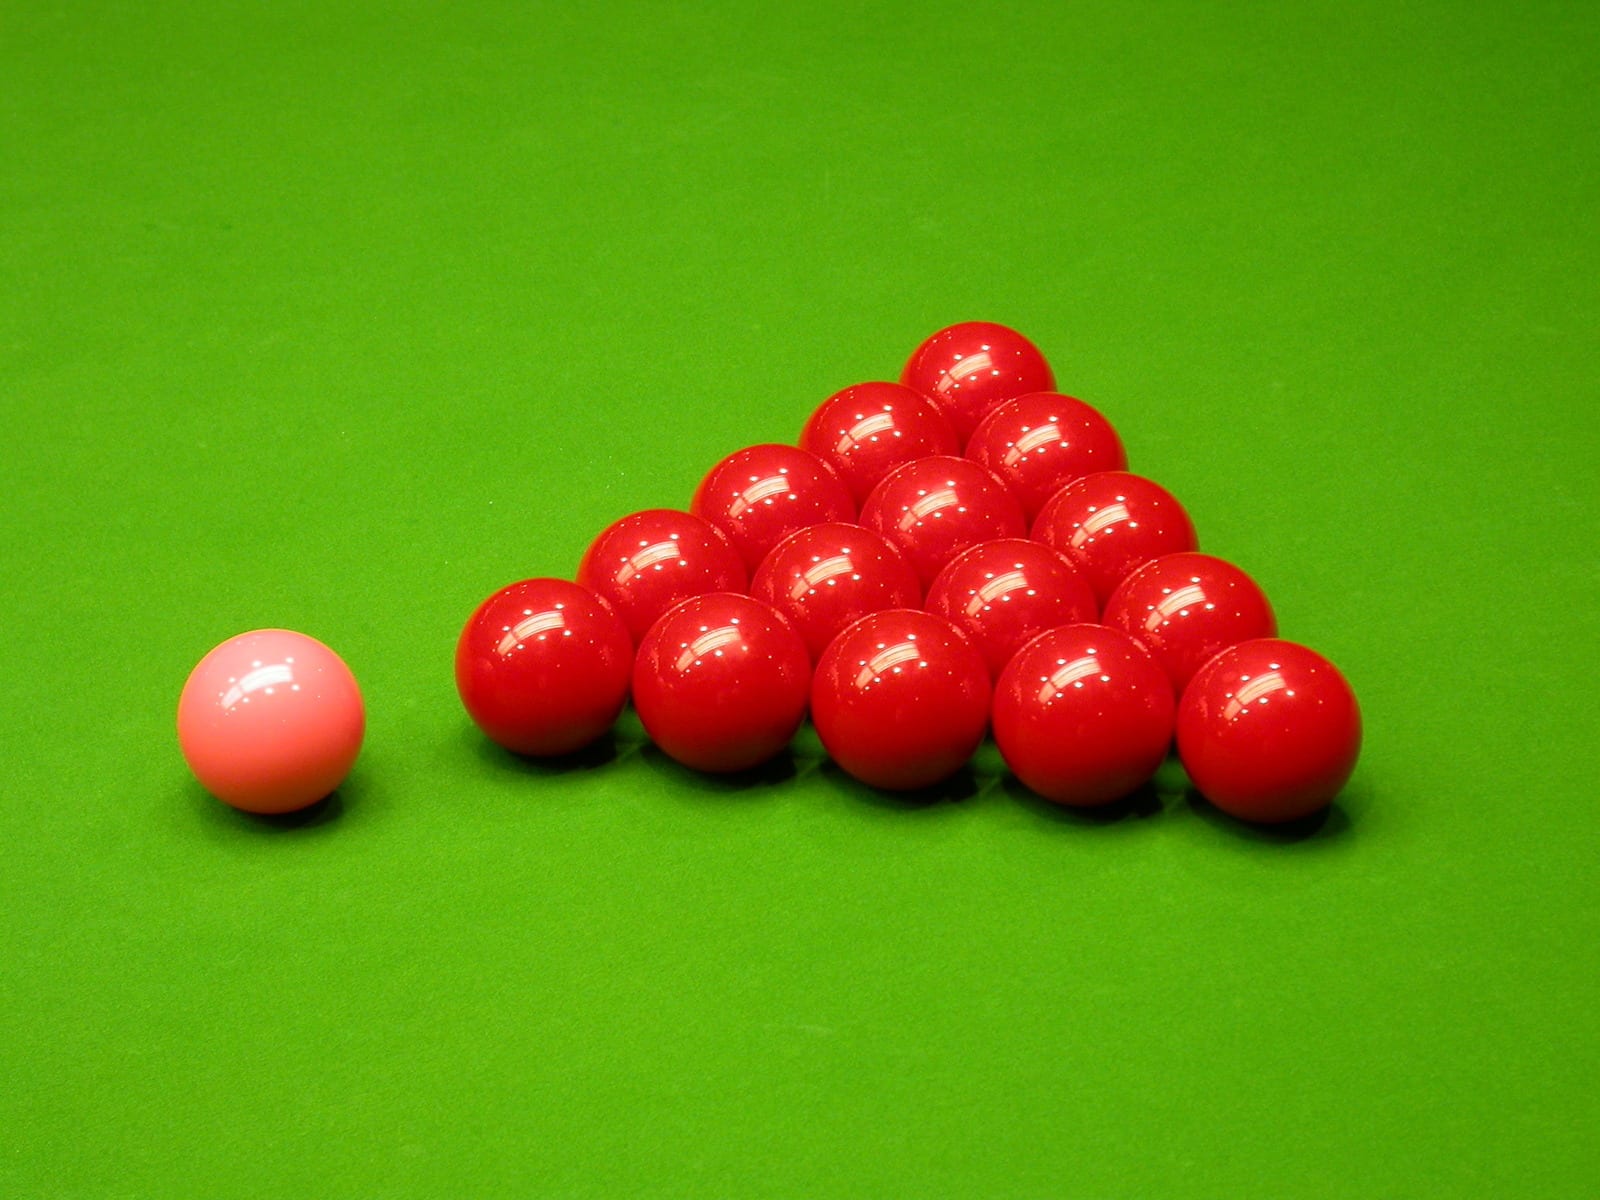 Snooker to return to The Hexagon